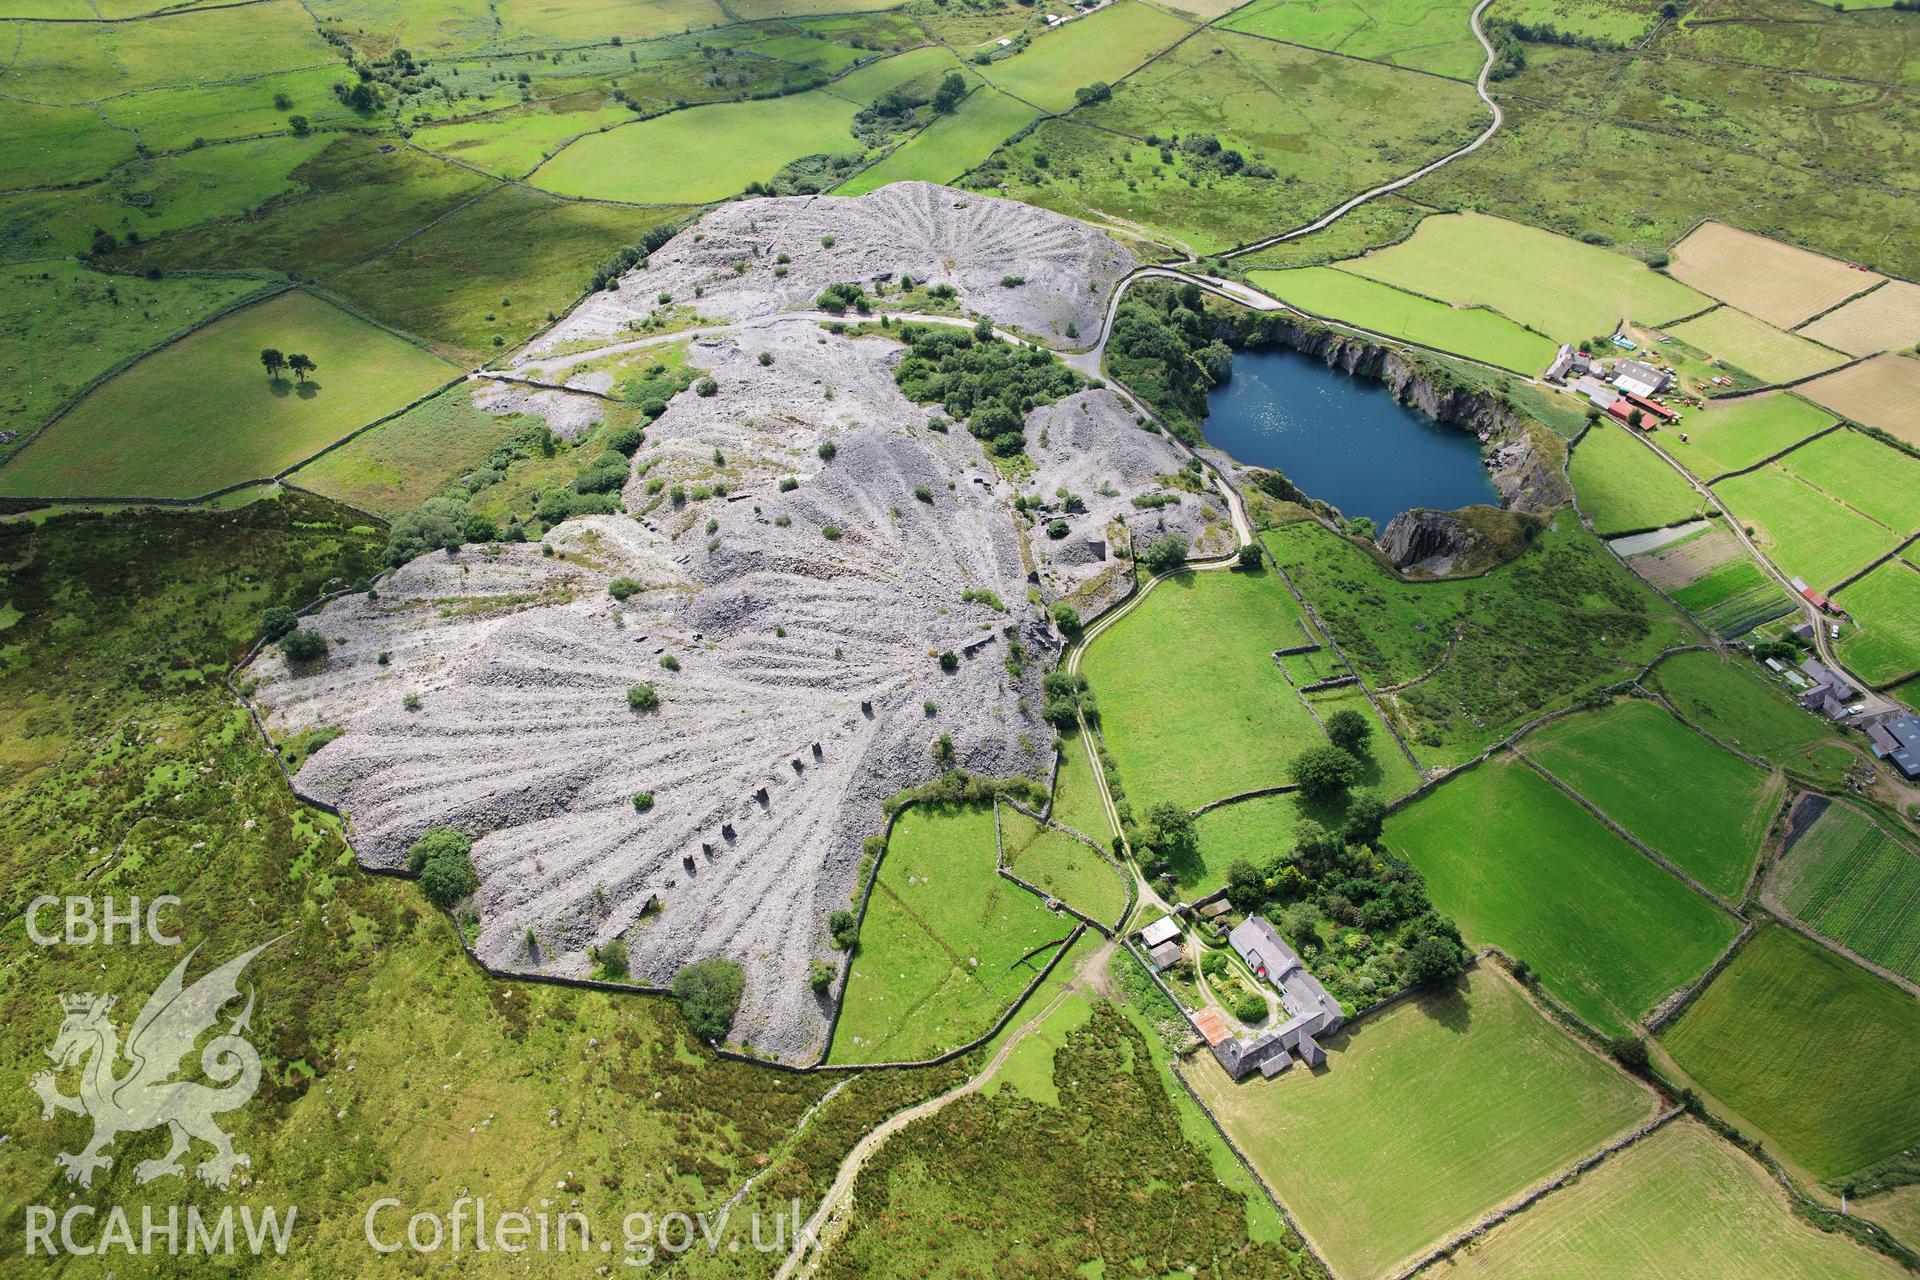 RCAHMW colour oblique photograph of Bryn Hafod-y-wern slate quarry, viewed from the north-east. Taken by Toby Driver on 10/08/2012.